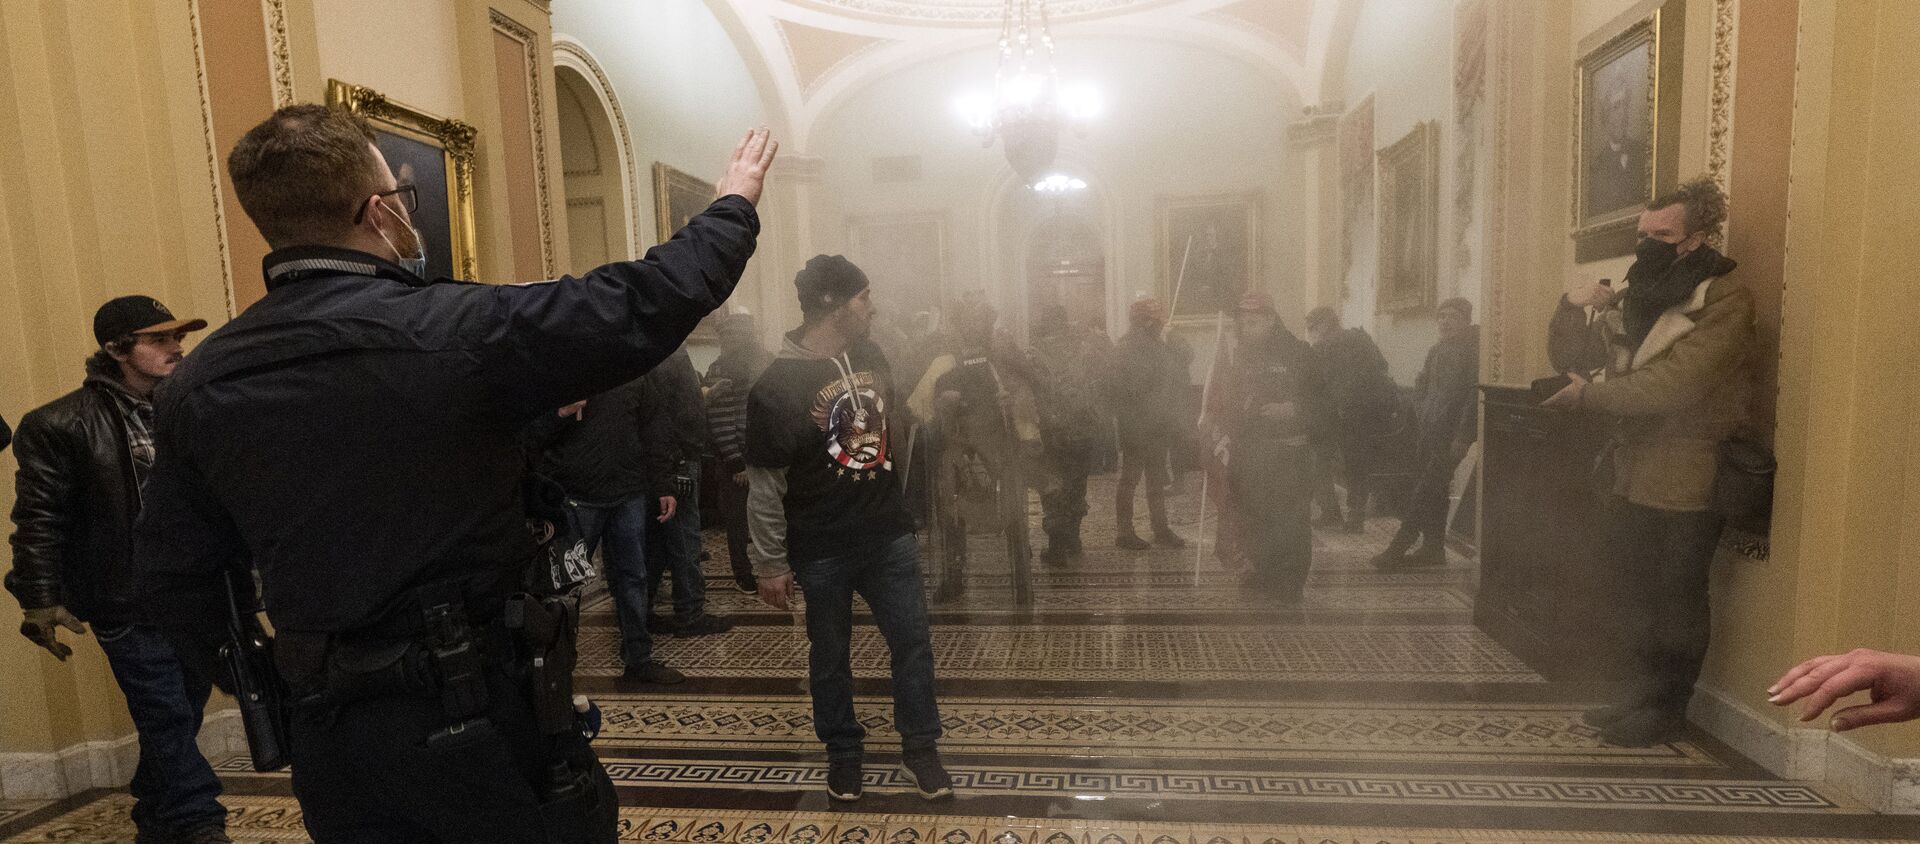 FILE - In this Jan. 6, 2021, file photo, smoke fills the walkway outside the Senate Chamber as rioters are confronted by U.S. Capitol Police officers inside the Capitol in Washington - Sputnik International, 1920, 24.07.2021